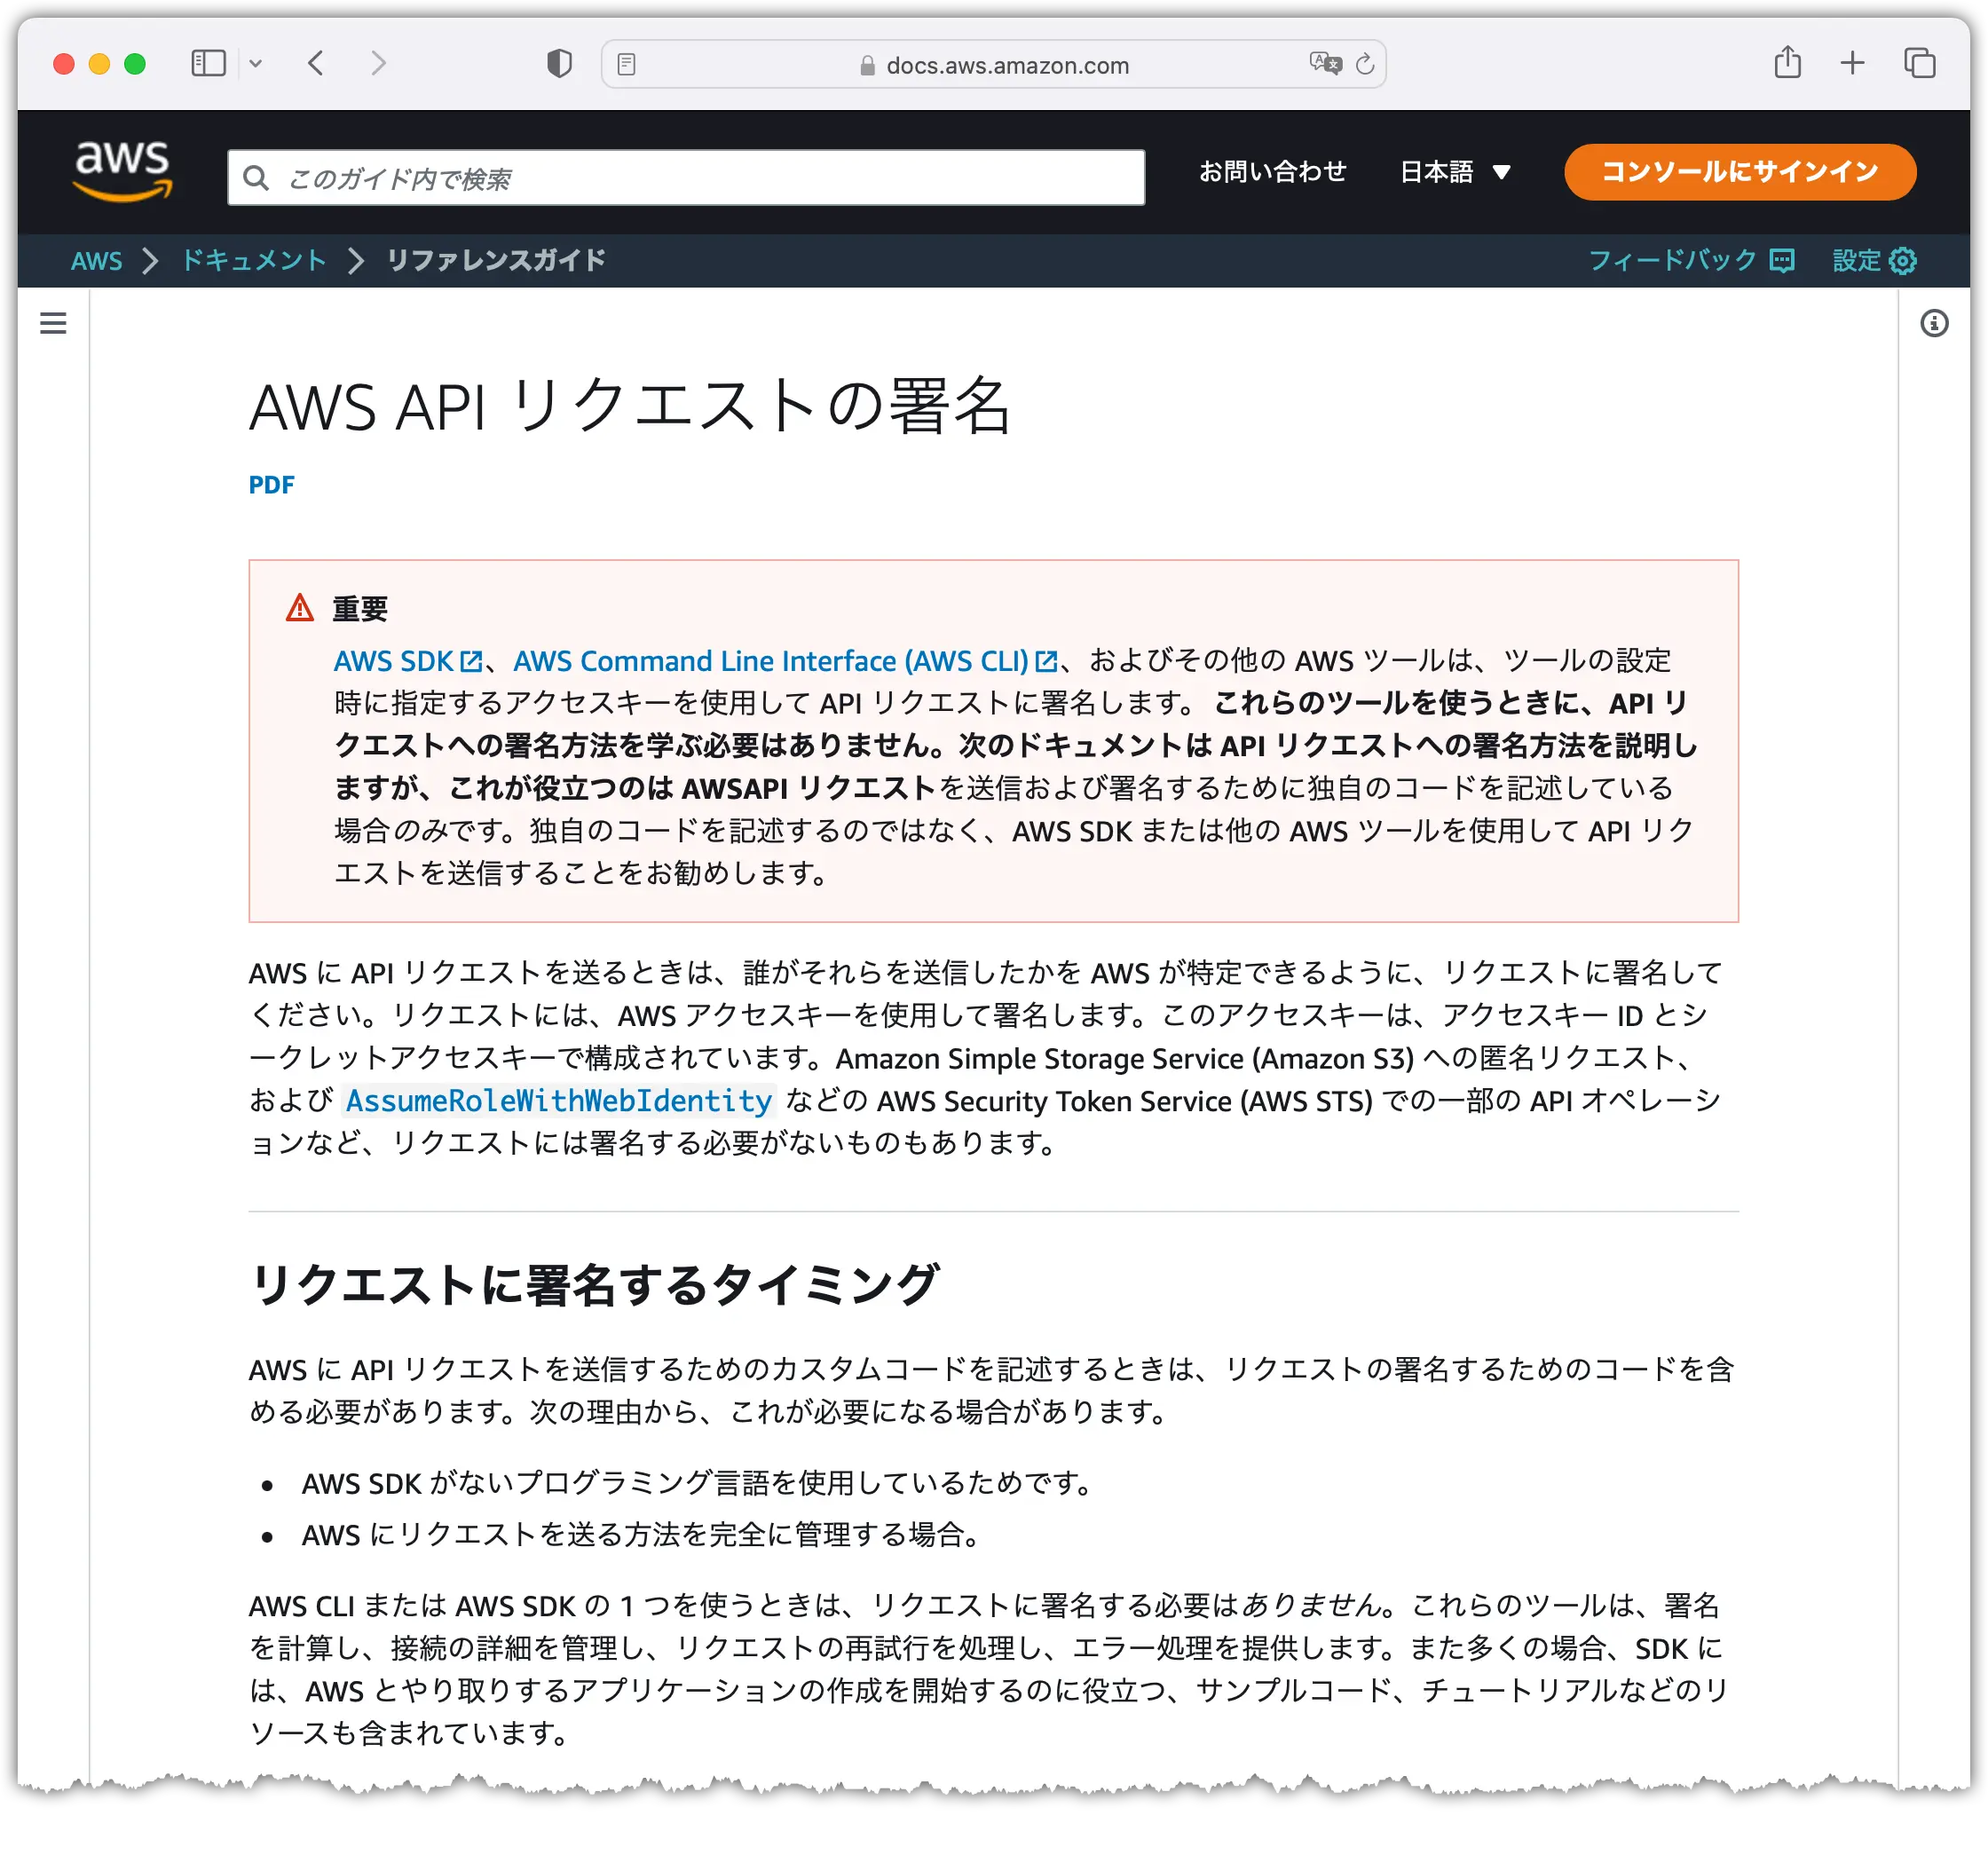 how-to-use-aws-apis-s3-ec2-from-filemaker-37